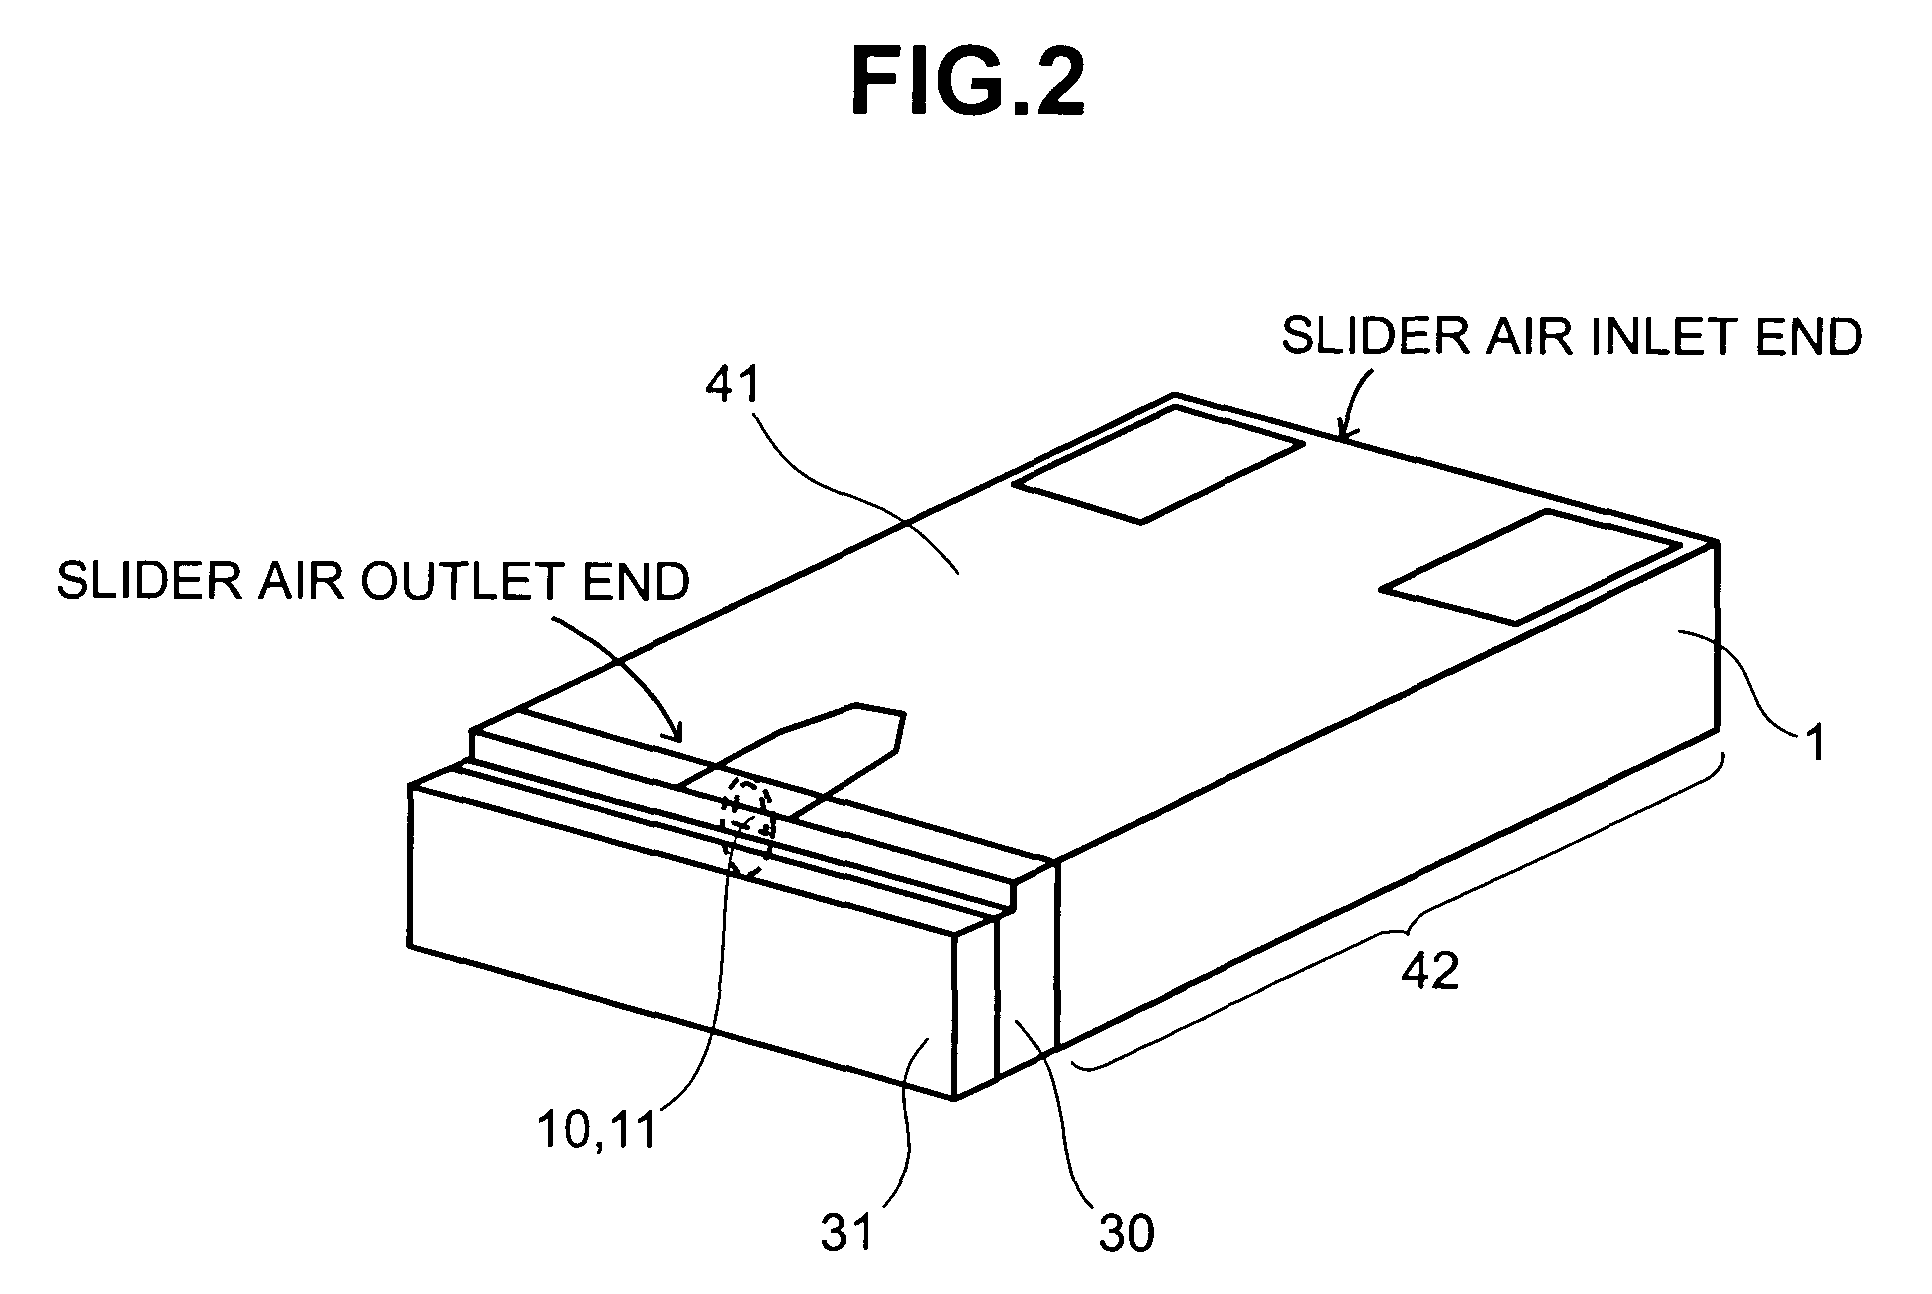 Magnetic head for reducing projection of retrieving and writing unit from float surface, and magnetic recording/retrieving apparatus using the same